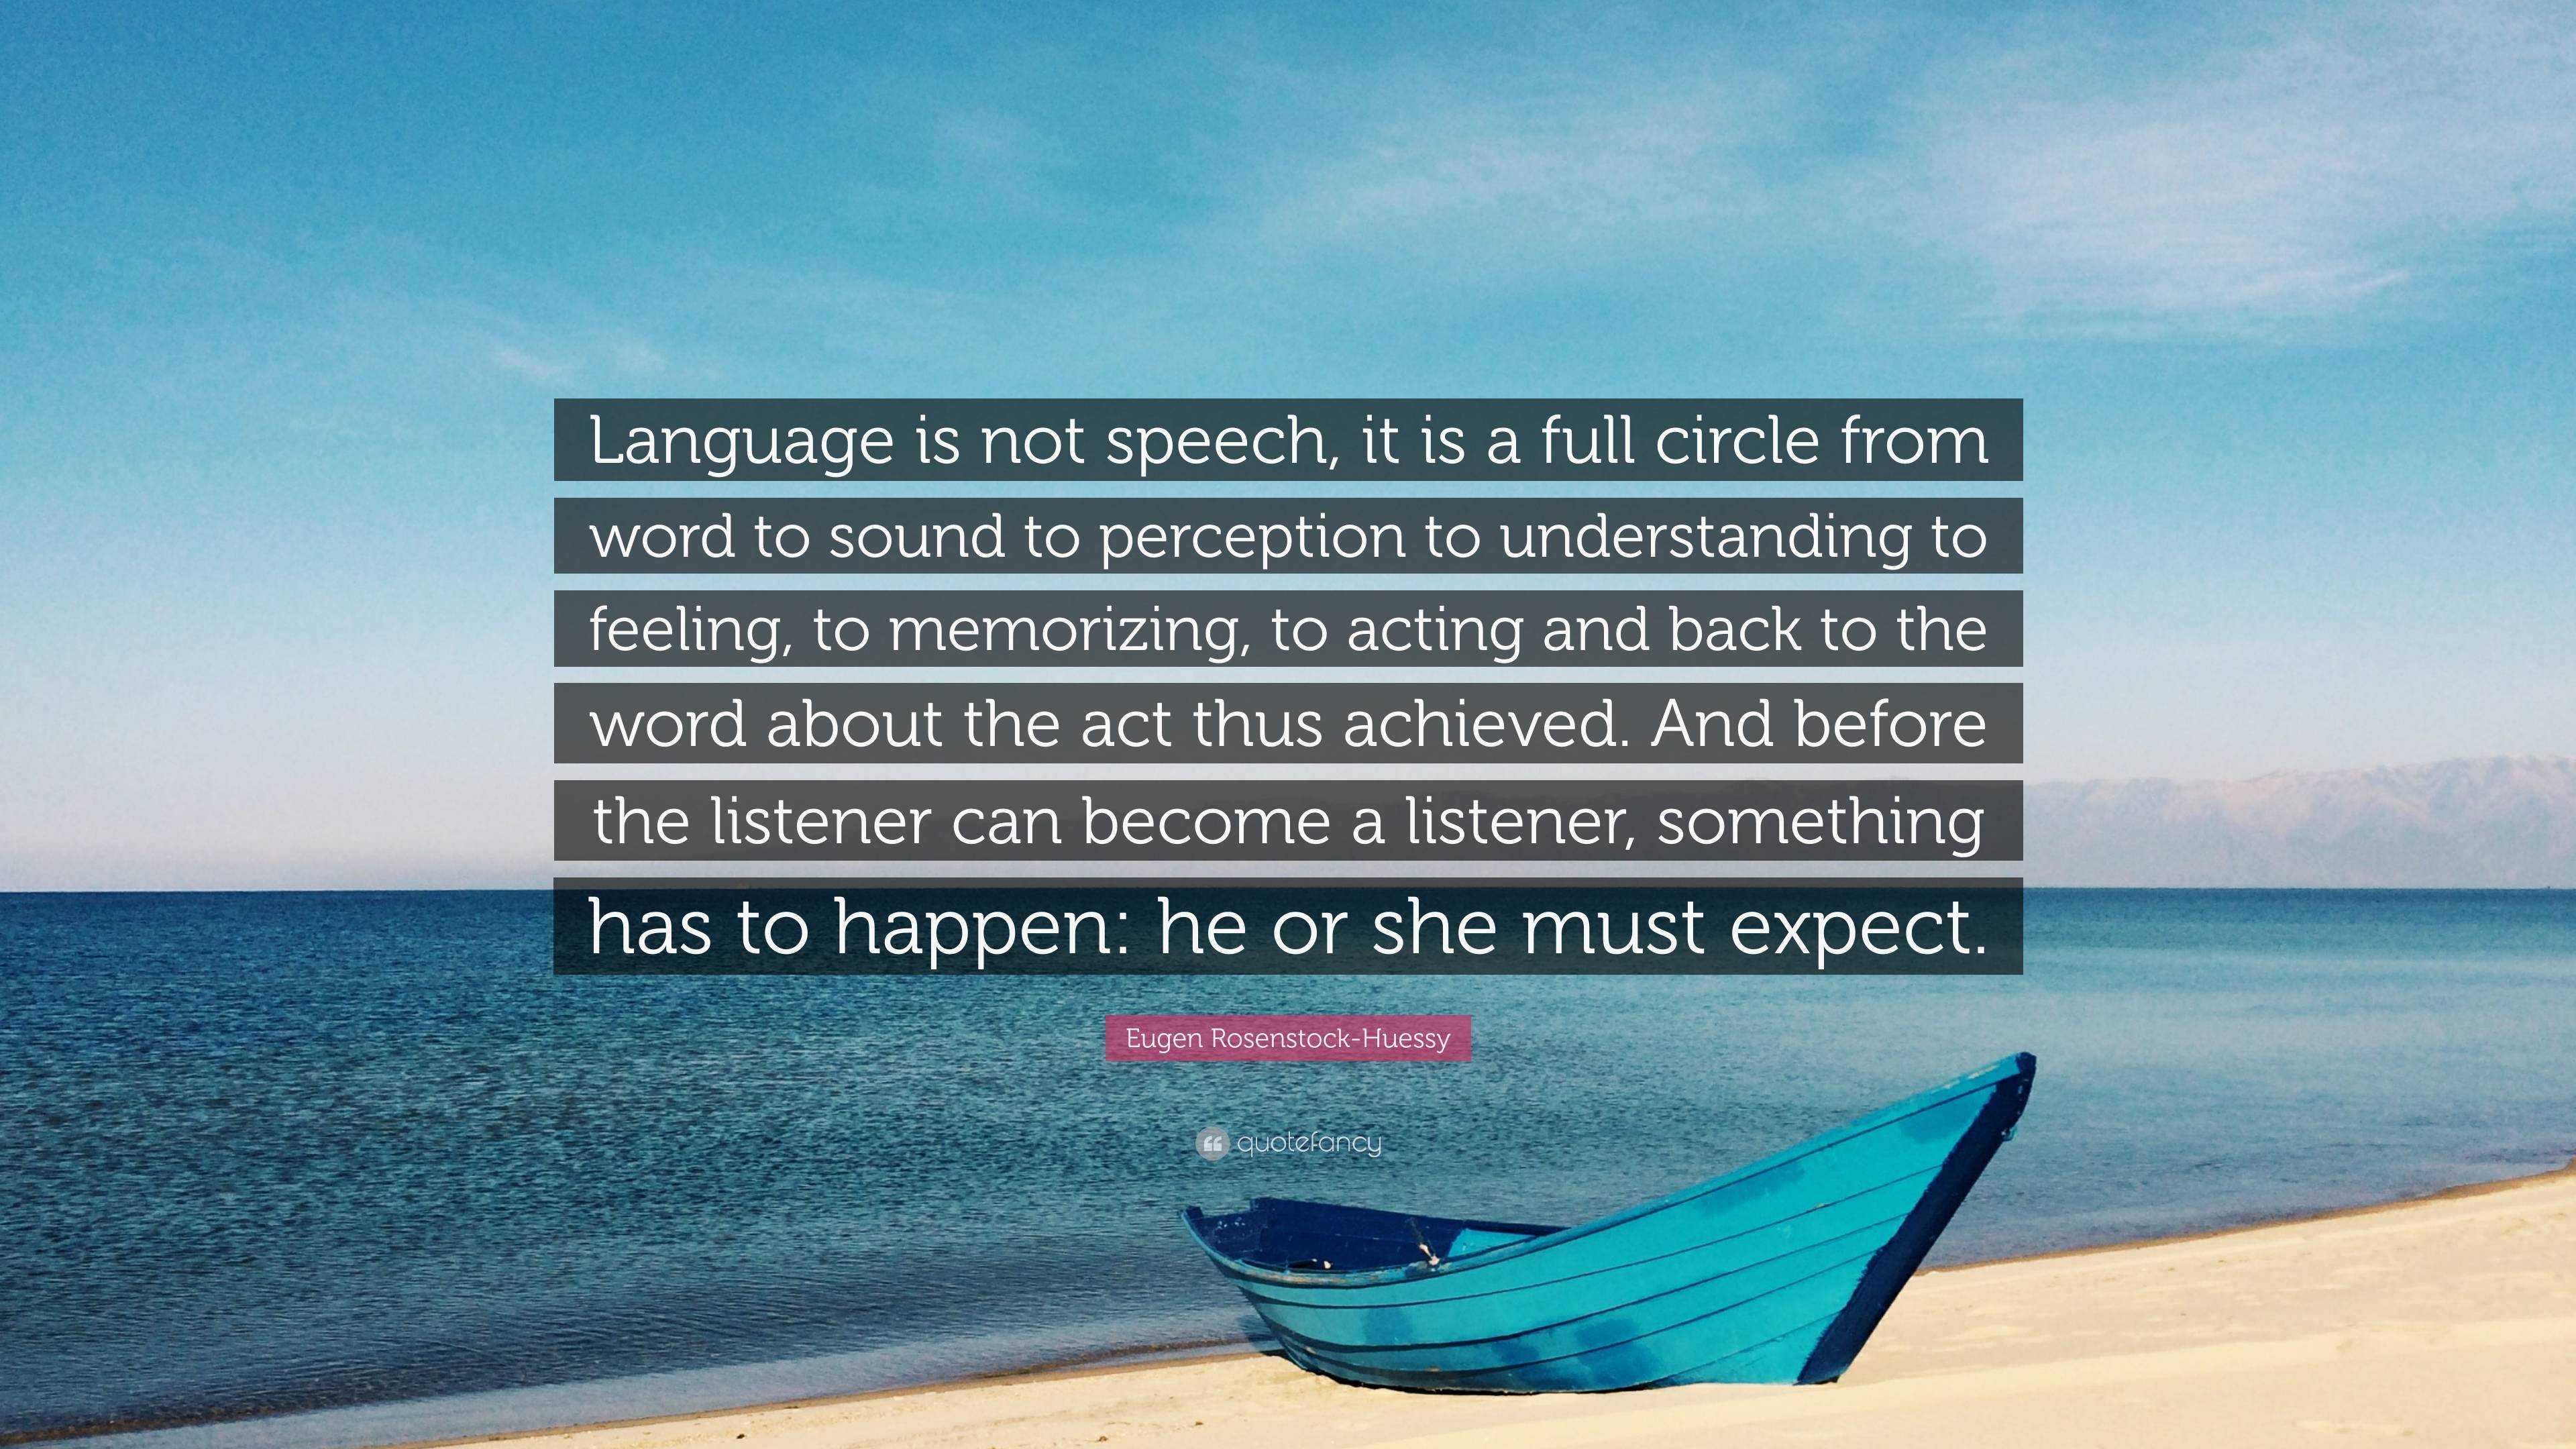 meaning of not speech